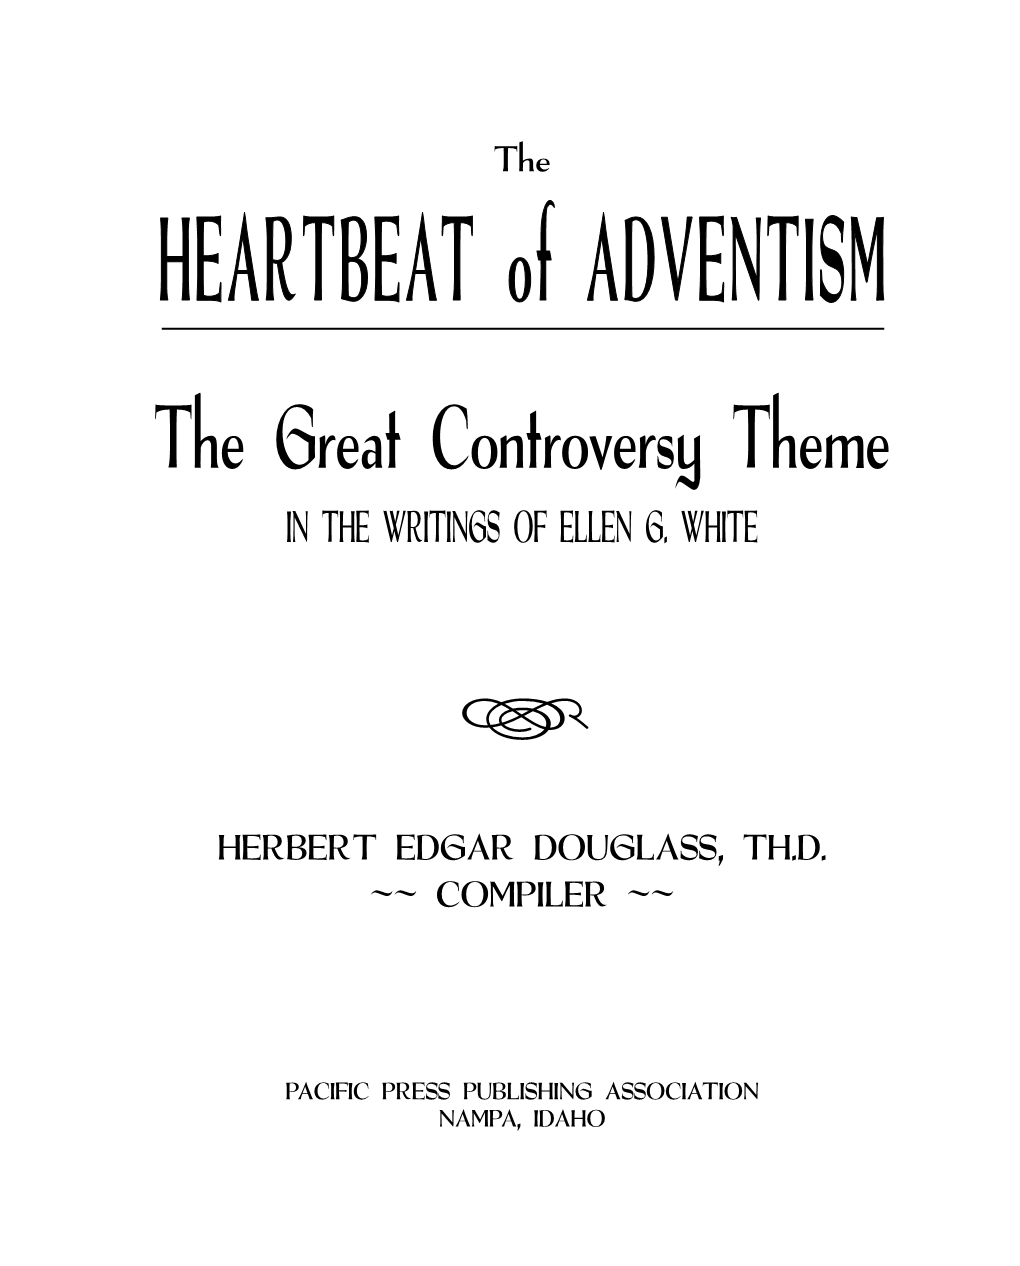 HEARTBEAT of ADVENTISM the Great Controversy Theme in the WRITINGS of ELLEN G